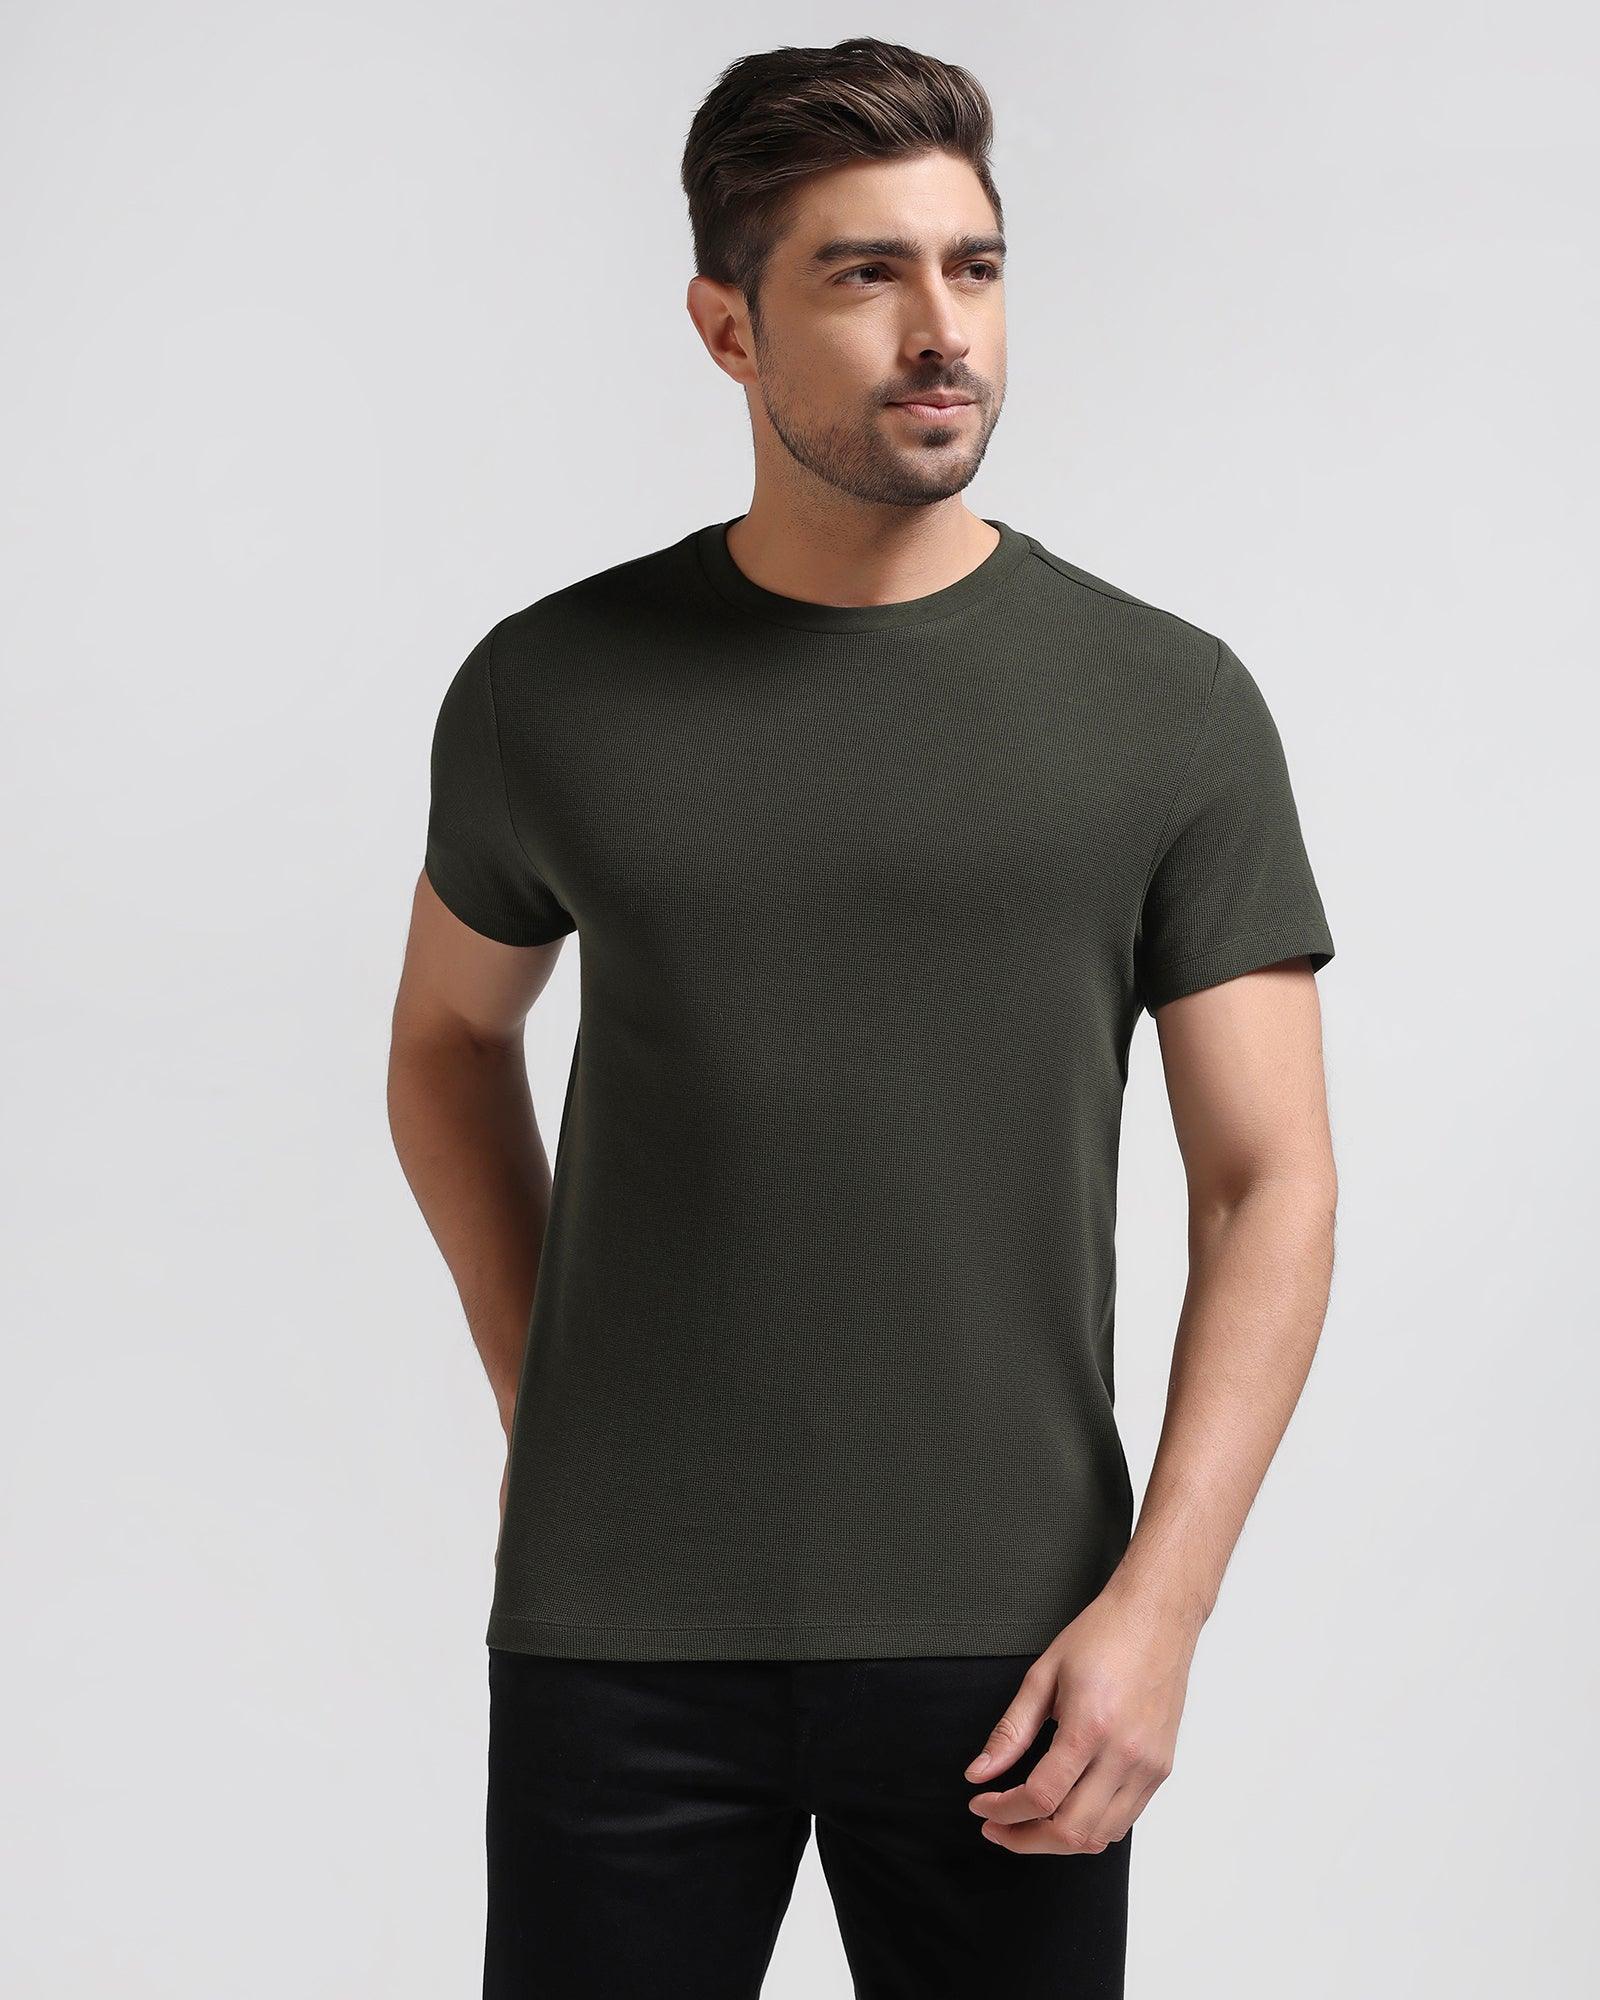 Crew Neck Olive Textured T-Shirt - Dae